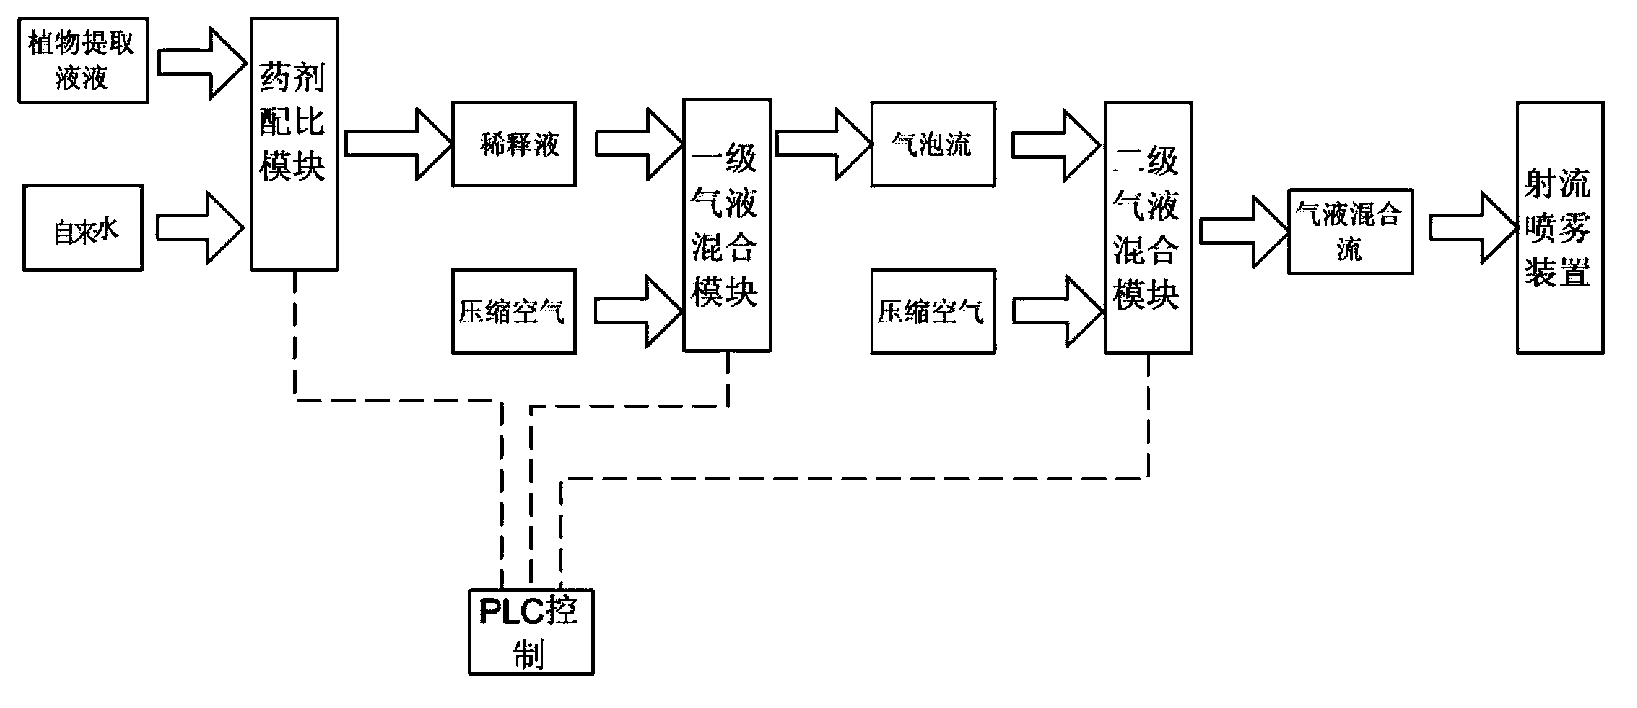 Method and system for carrying out atomization deodorization by adopting plant extract solution